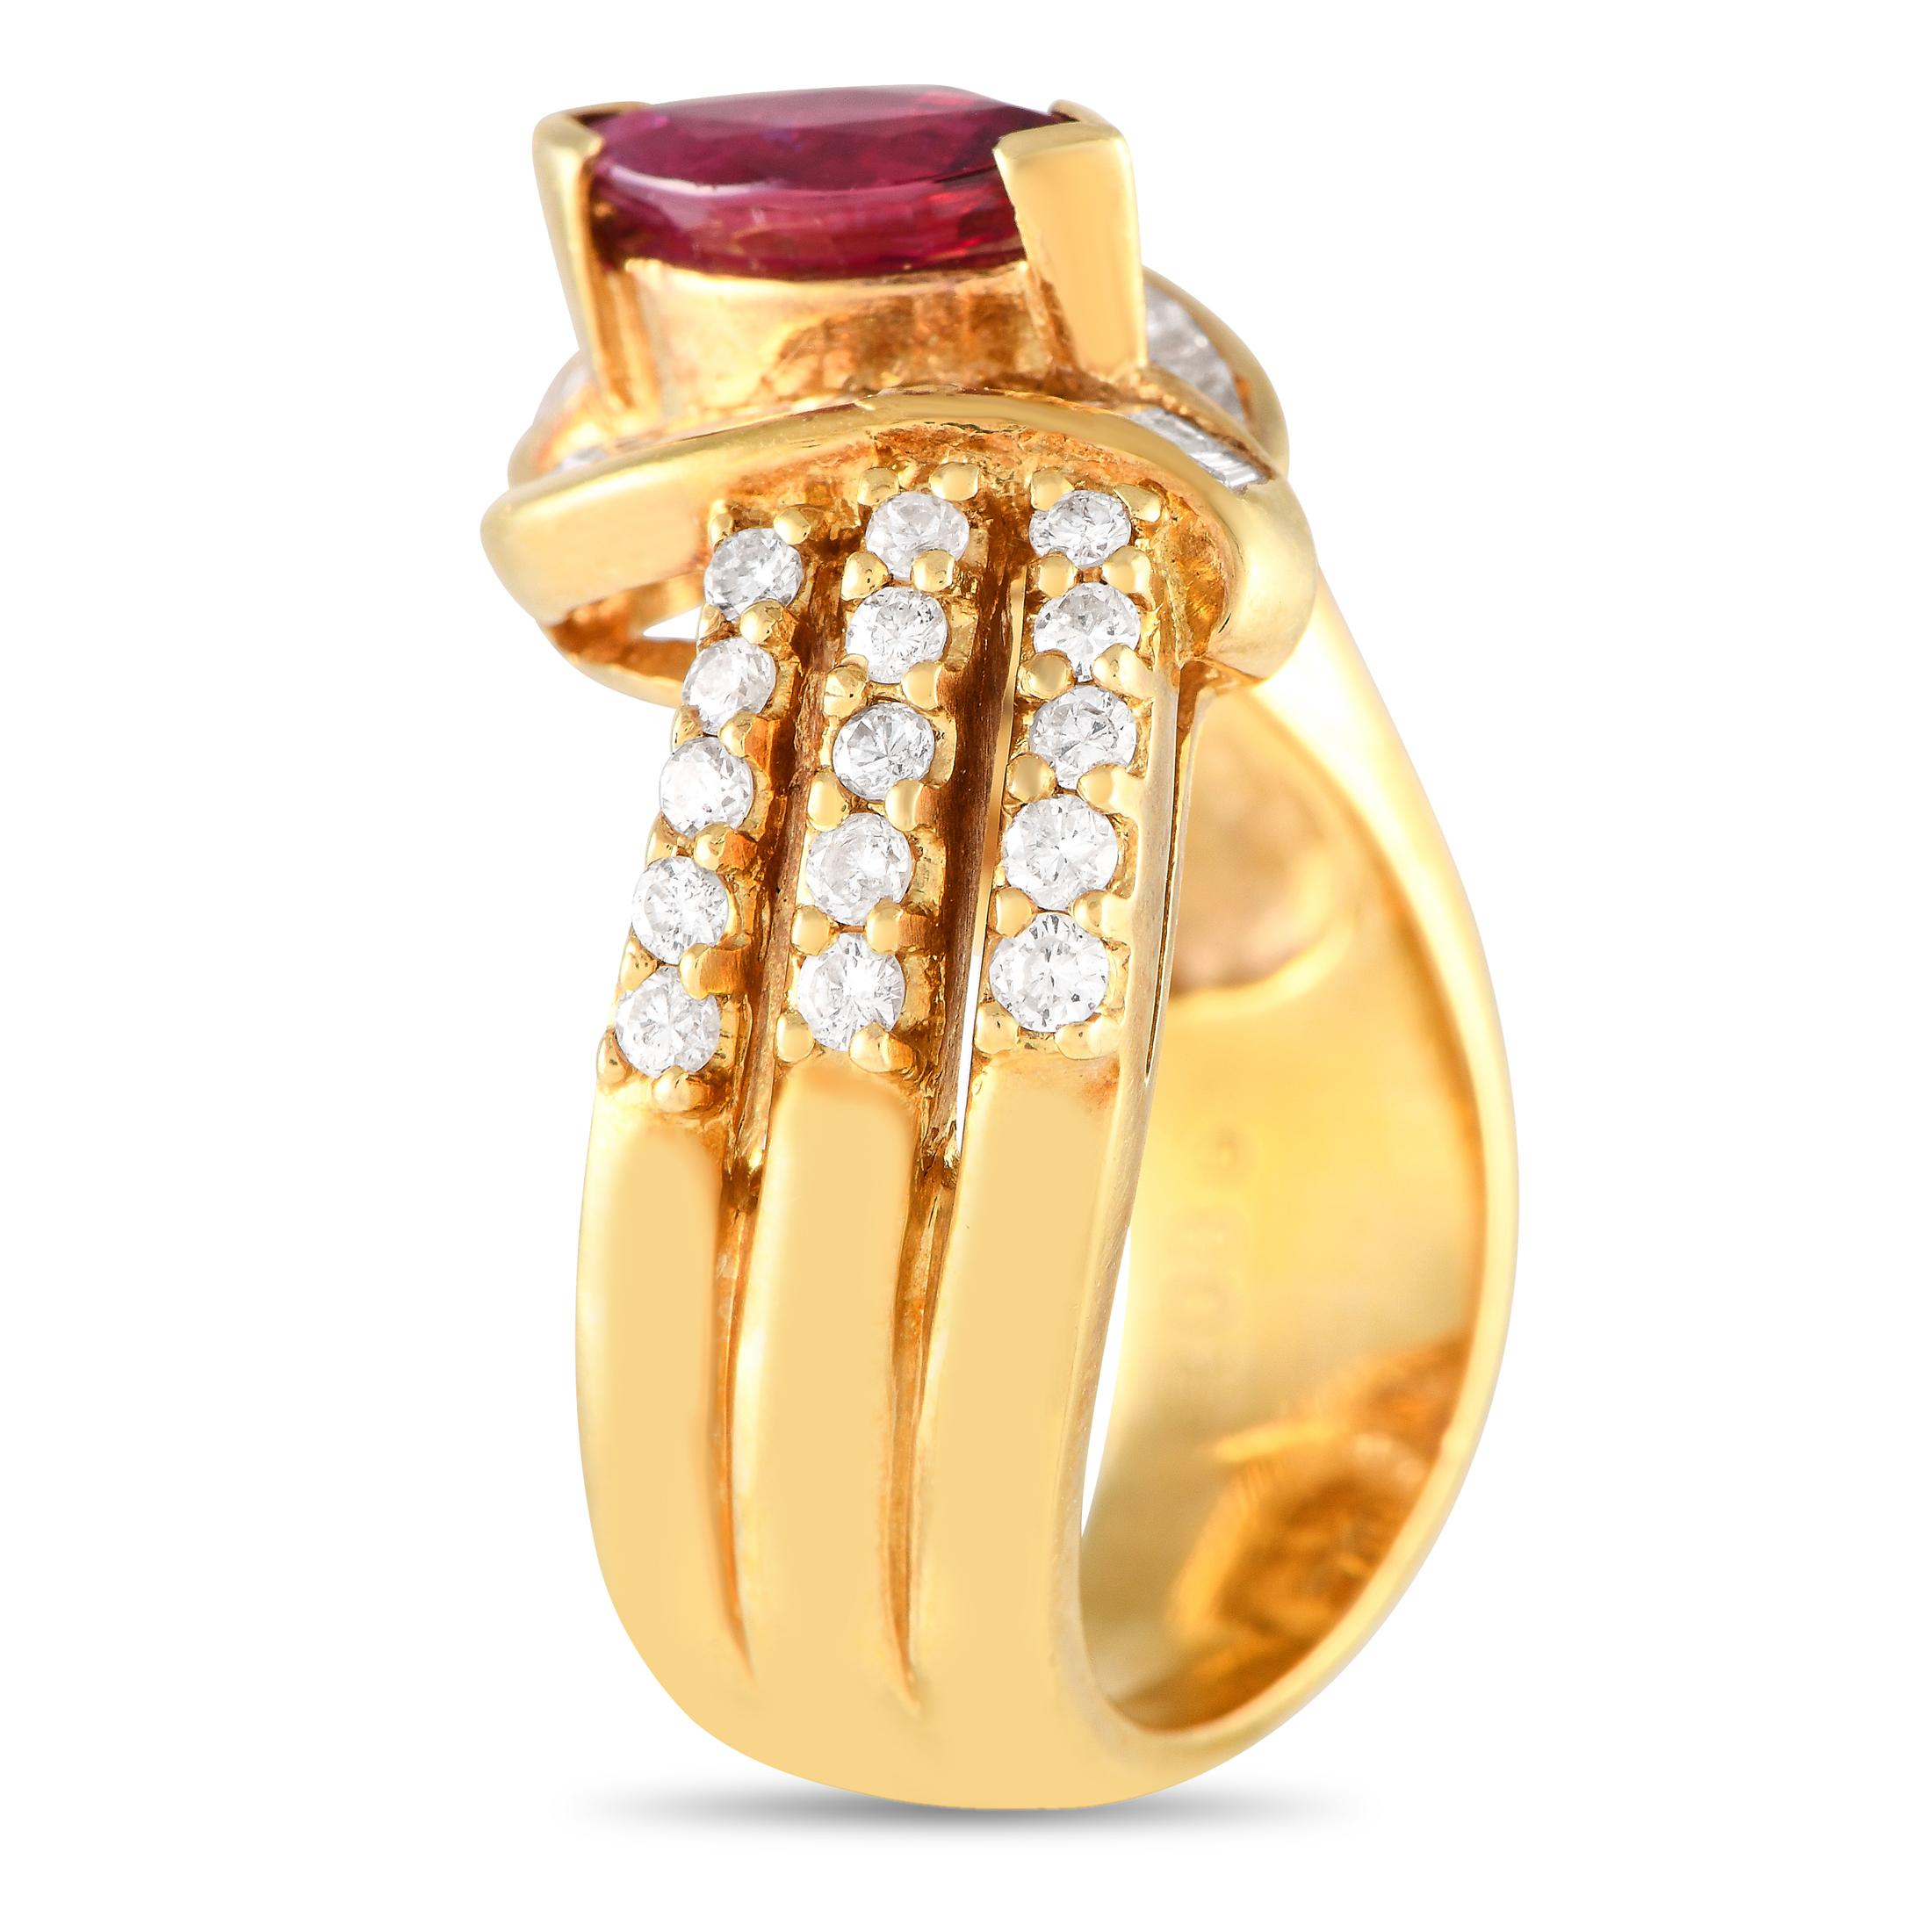 It's impossible not to notice the ultra-femme beauty of this ring. The shapely band features split shoulders that result in trios of slender, diamond-pave shanks. They lead to a contoured channel with baguette diamonds. Taking the spotlight is a